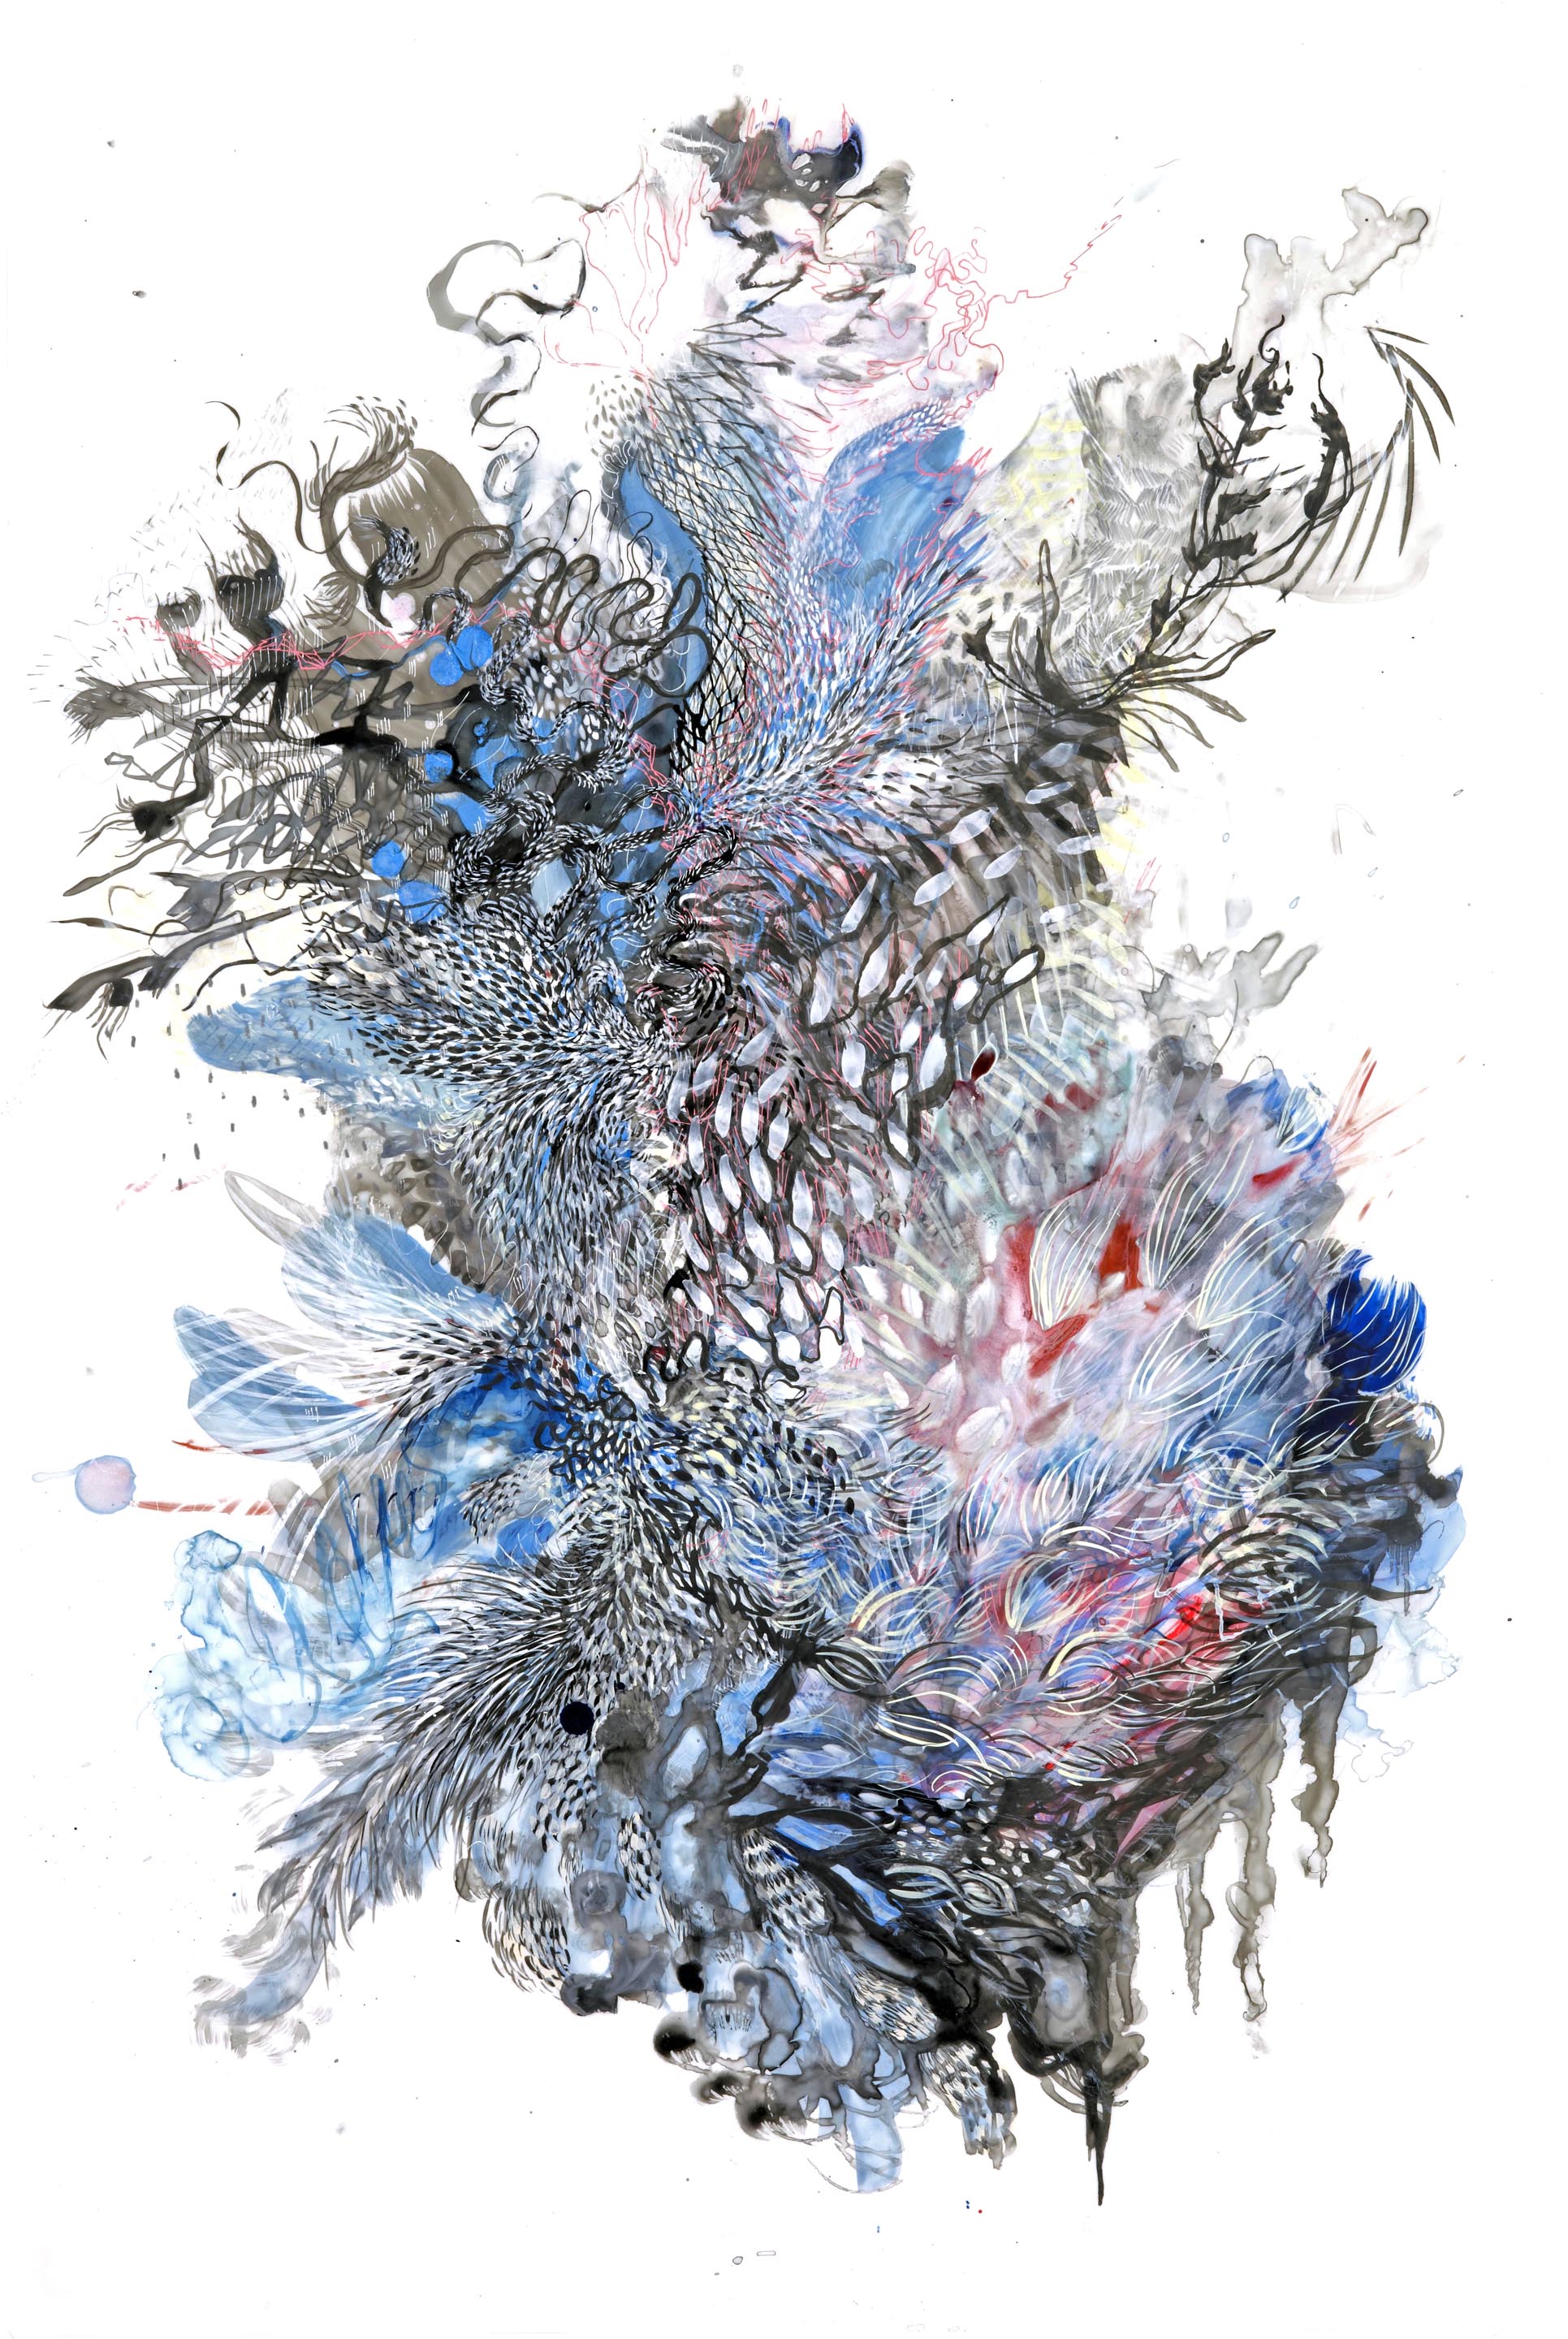  Paola Oxoa  Second Nature 14 , 2011, Ink, gouache, and graphite on mylar,  36 x 24 in. (91.44 x 60.96 cm) 